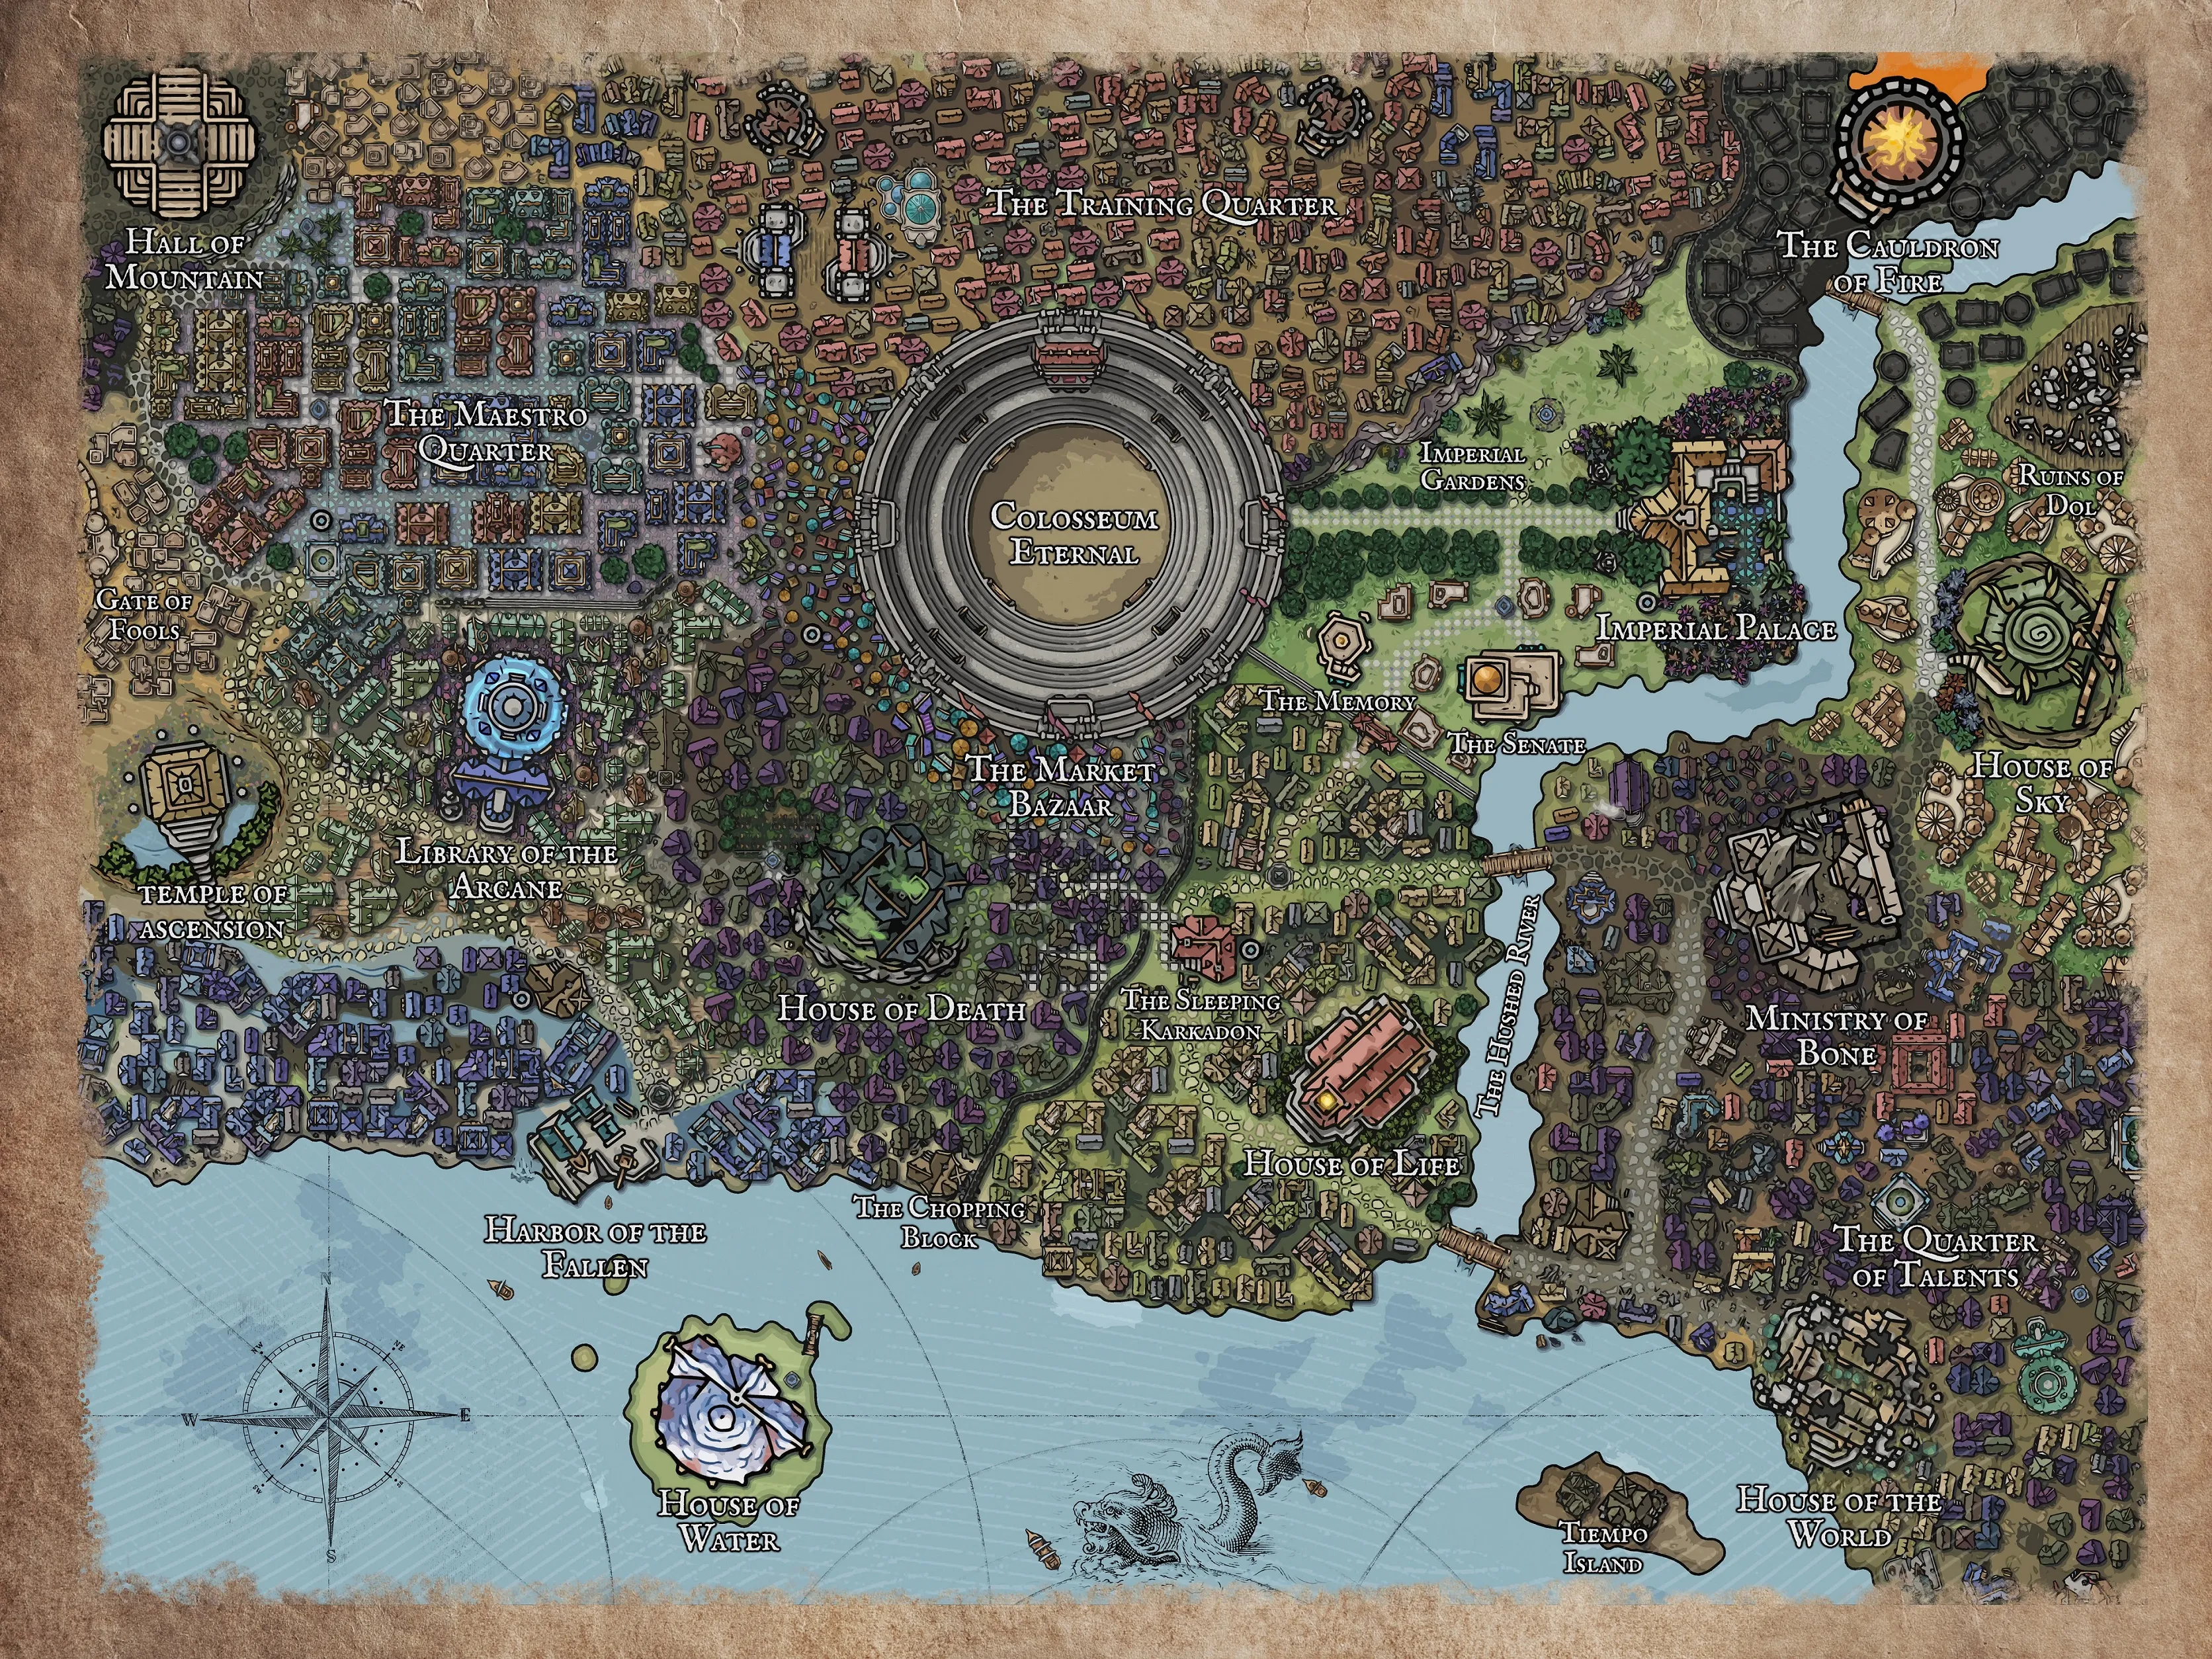 The image from Champions Ascension shows a map of a massive fantasy world called Massina, filled with bustling cities, wide wilderness, and deadly dungeons.